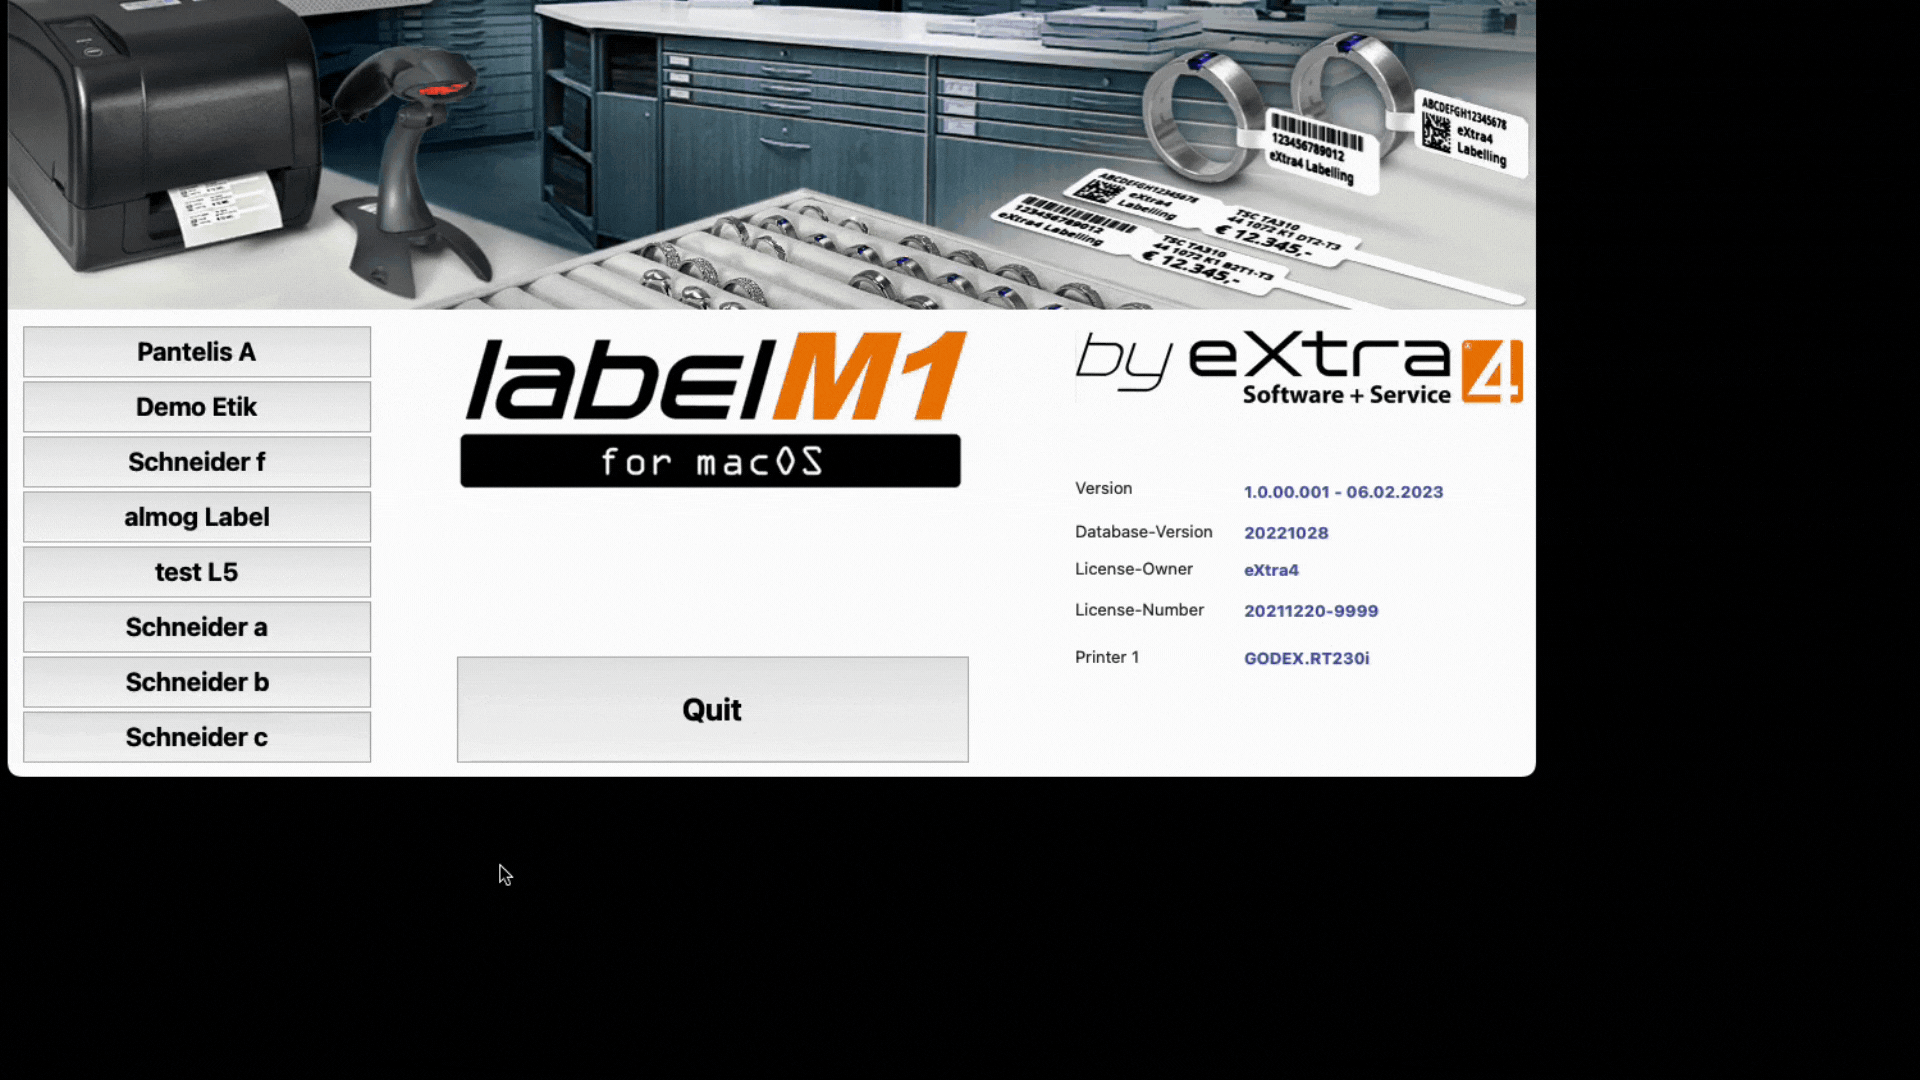 eXtra4-labelM1 software for label printing on MAC